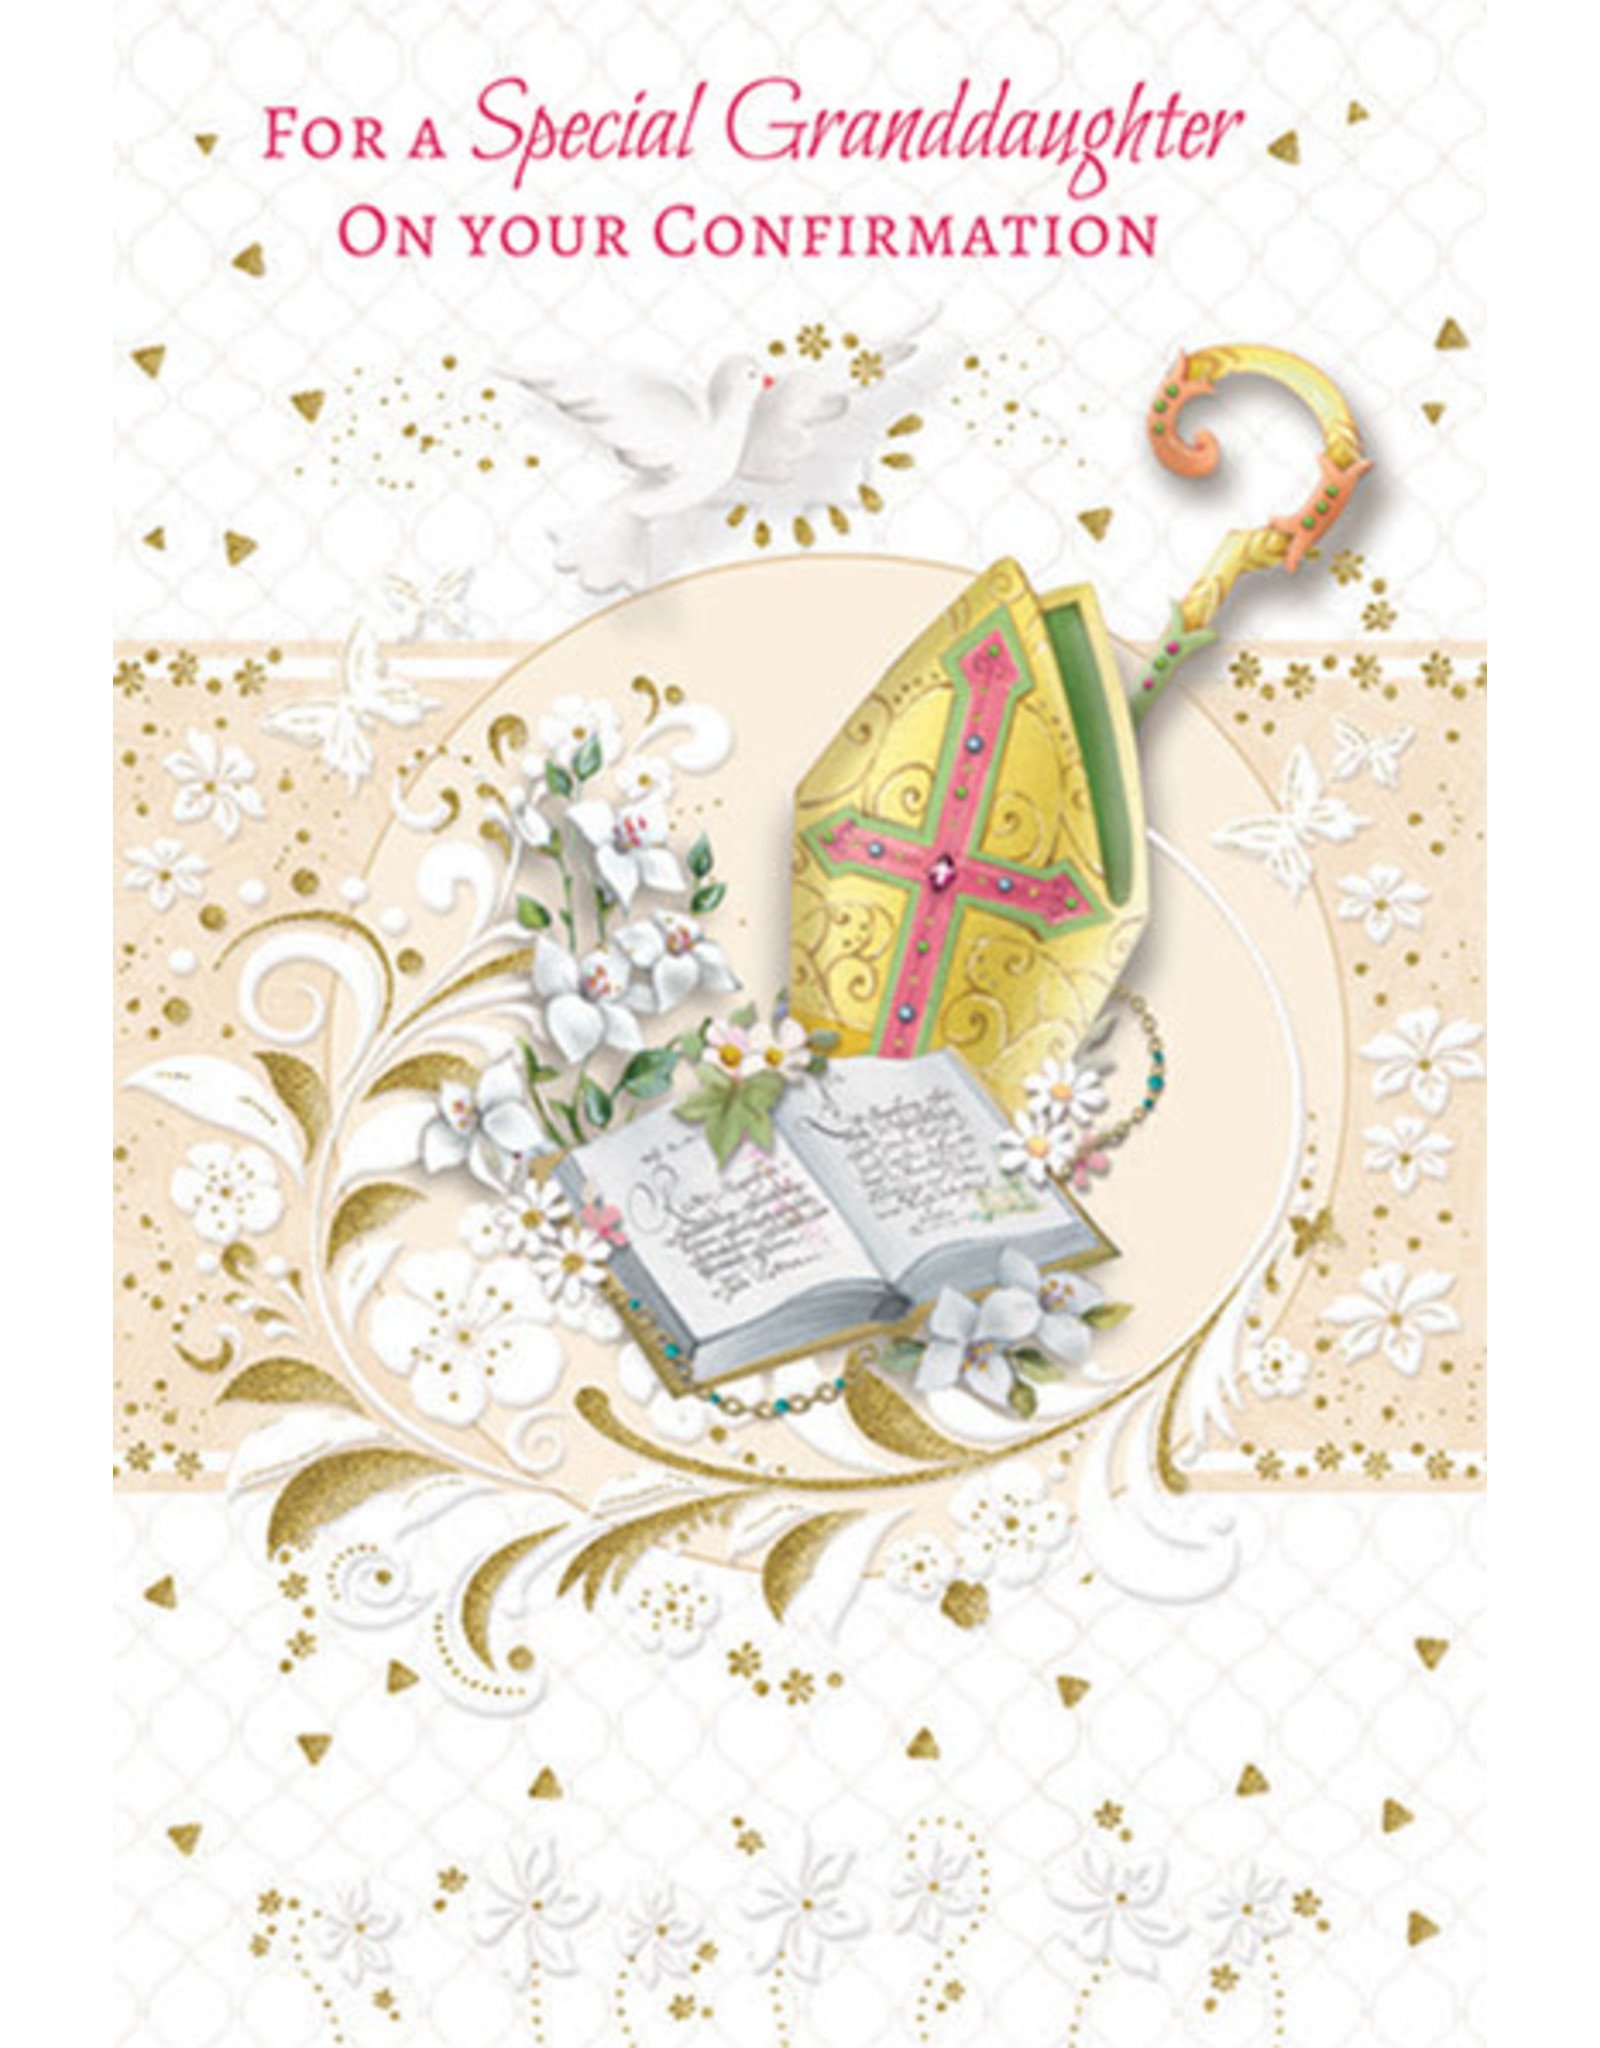 Greetings of Faith Card - Confirmation, Granddaughter, Embossed & Gold Foil